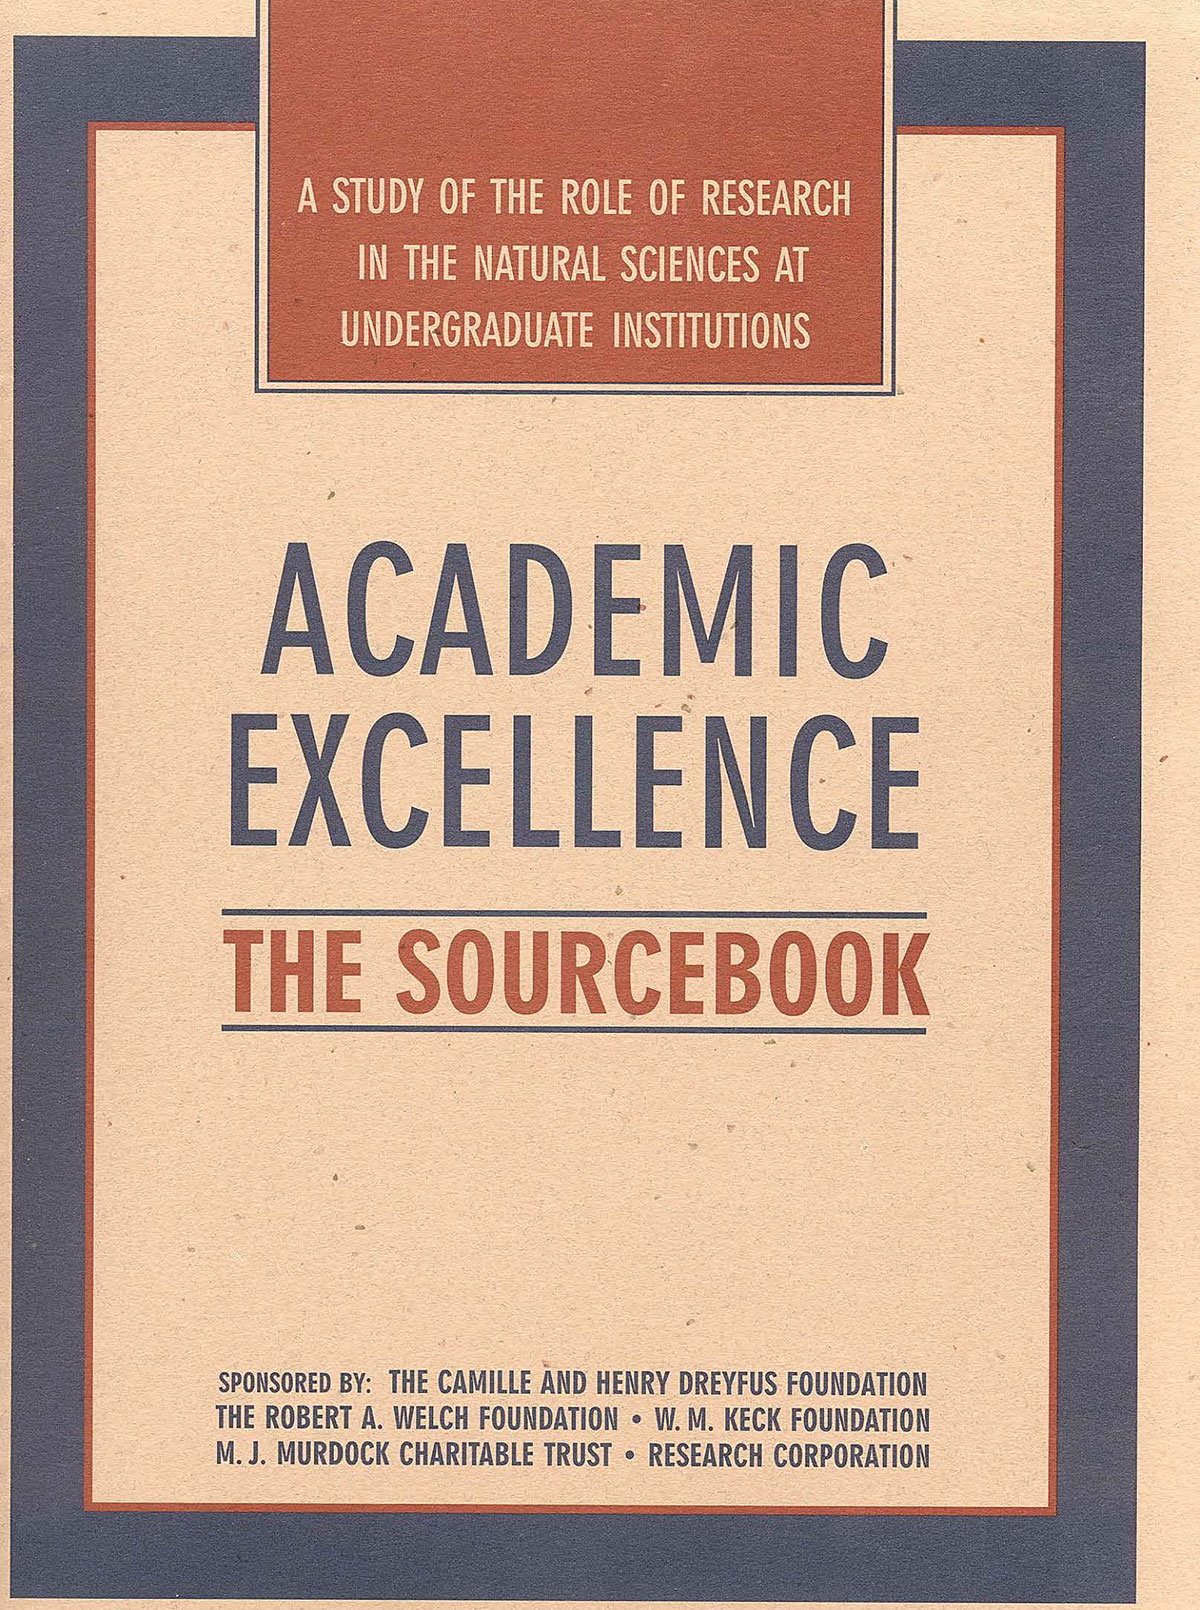 Academic Excellence: The Sourcebook